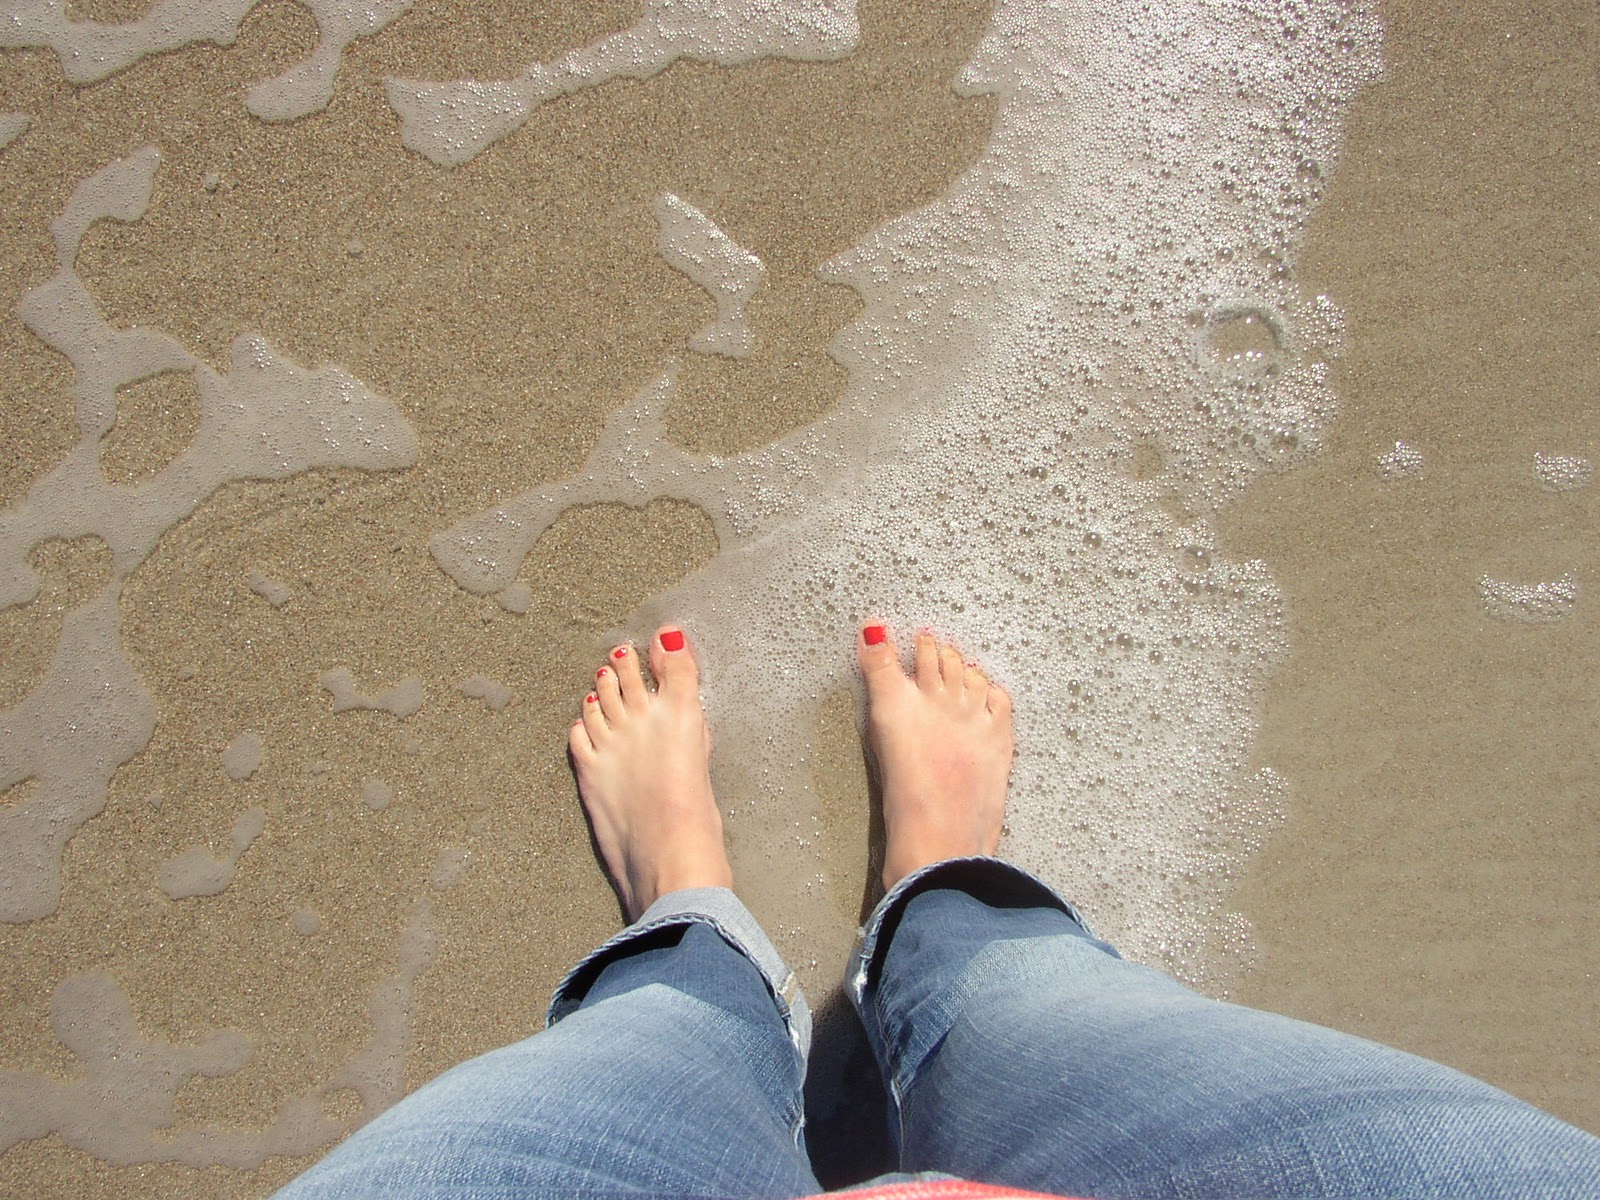 something beautiful: toes in the sand